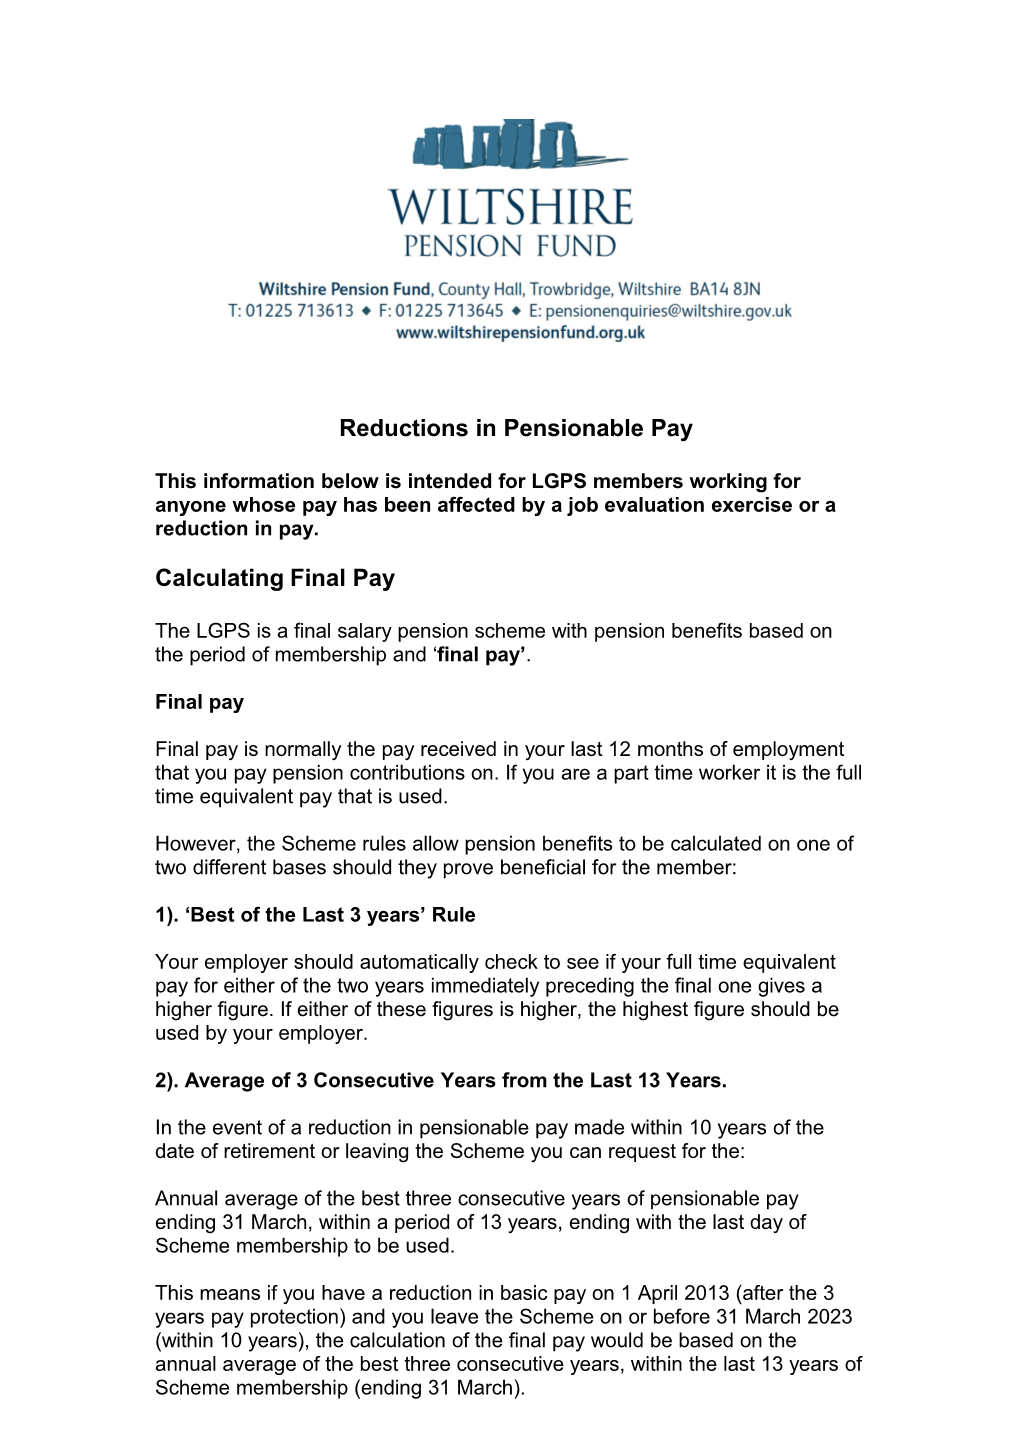 Reductions in Pensionable Pay